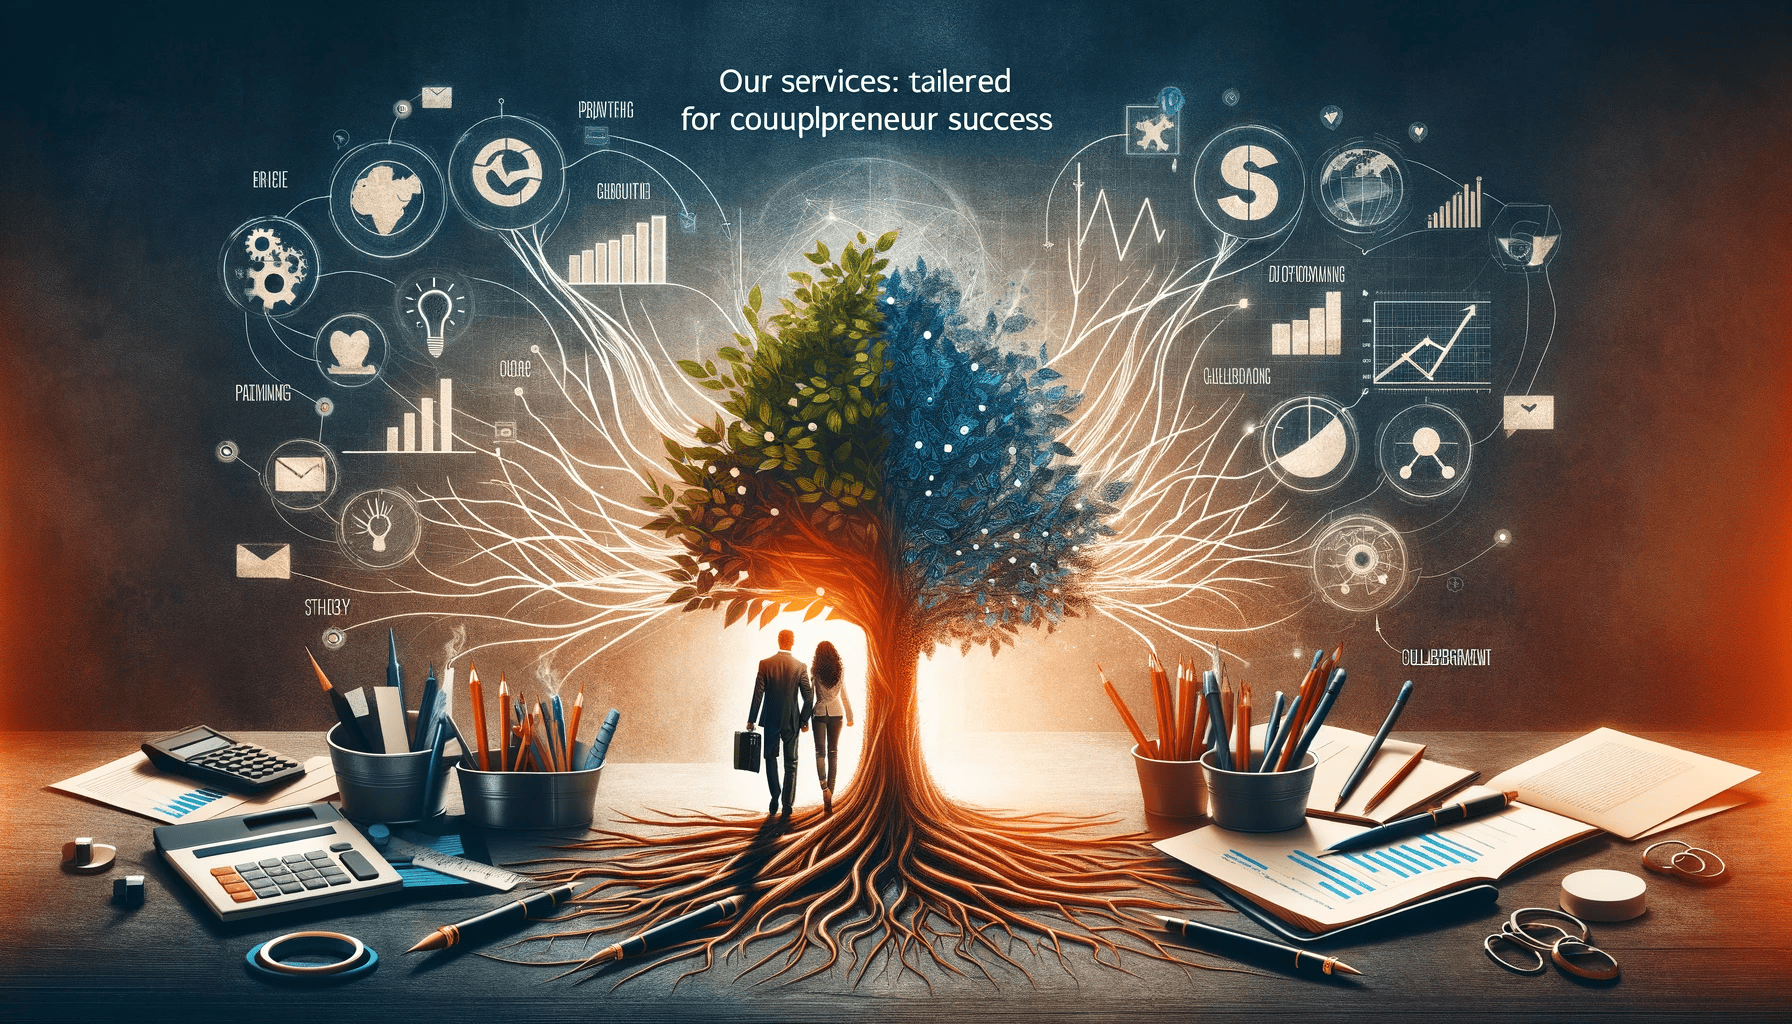 Conceptual image of intertwined tree branches representing couplepreneur growth, surrounded by business tools like charts, graphs, and digital devices, highlighting innovation and collaborative strategy in couple-run businesses.